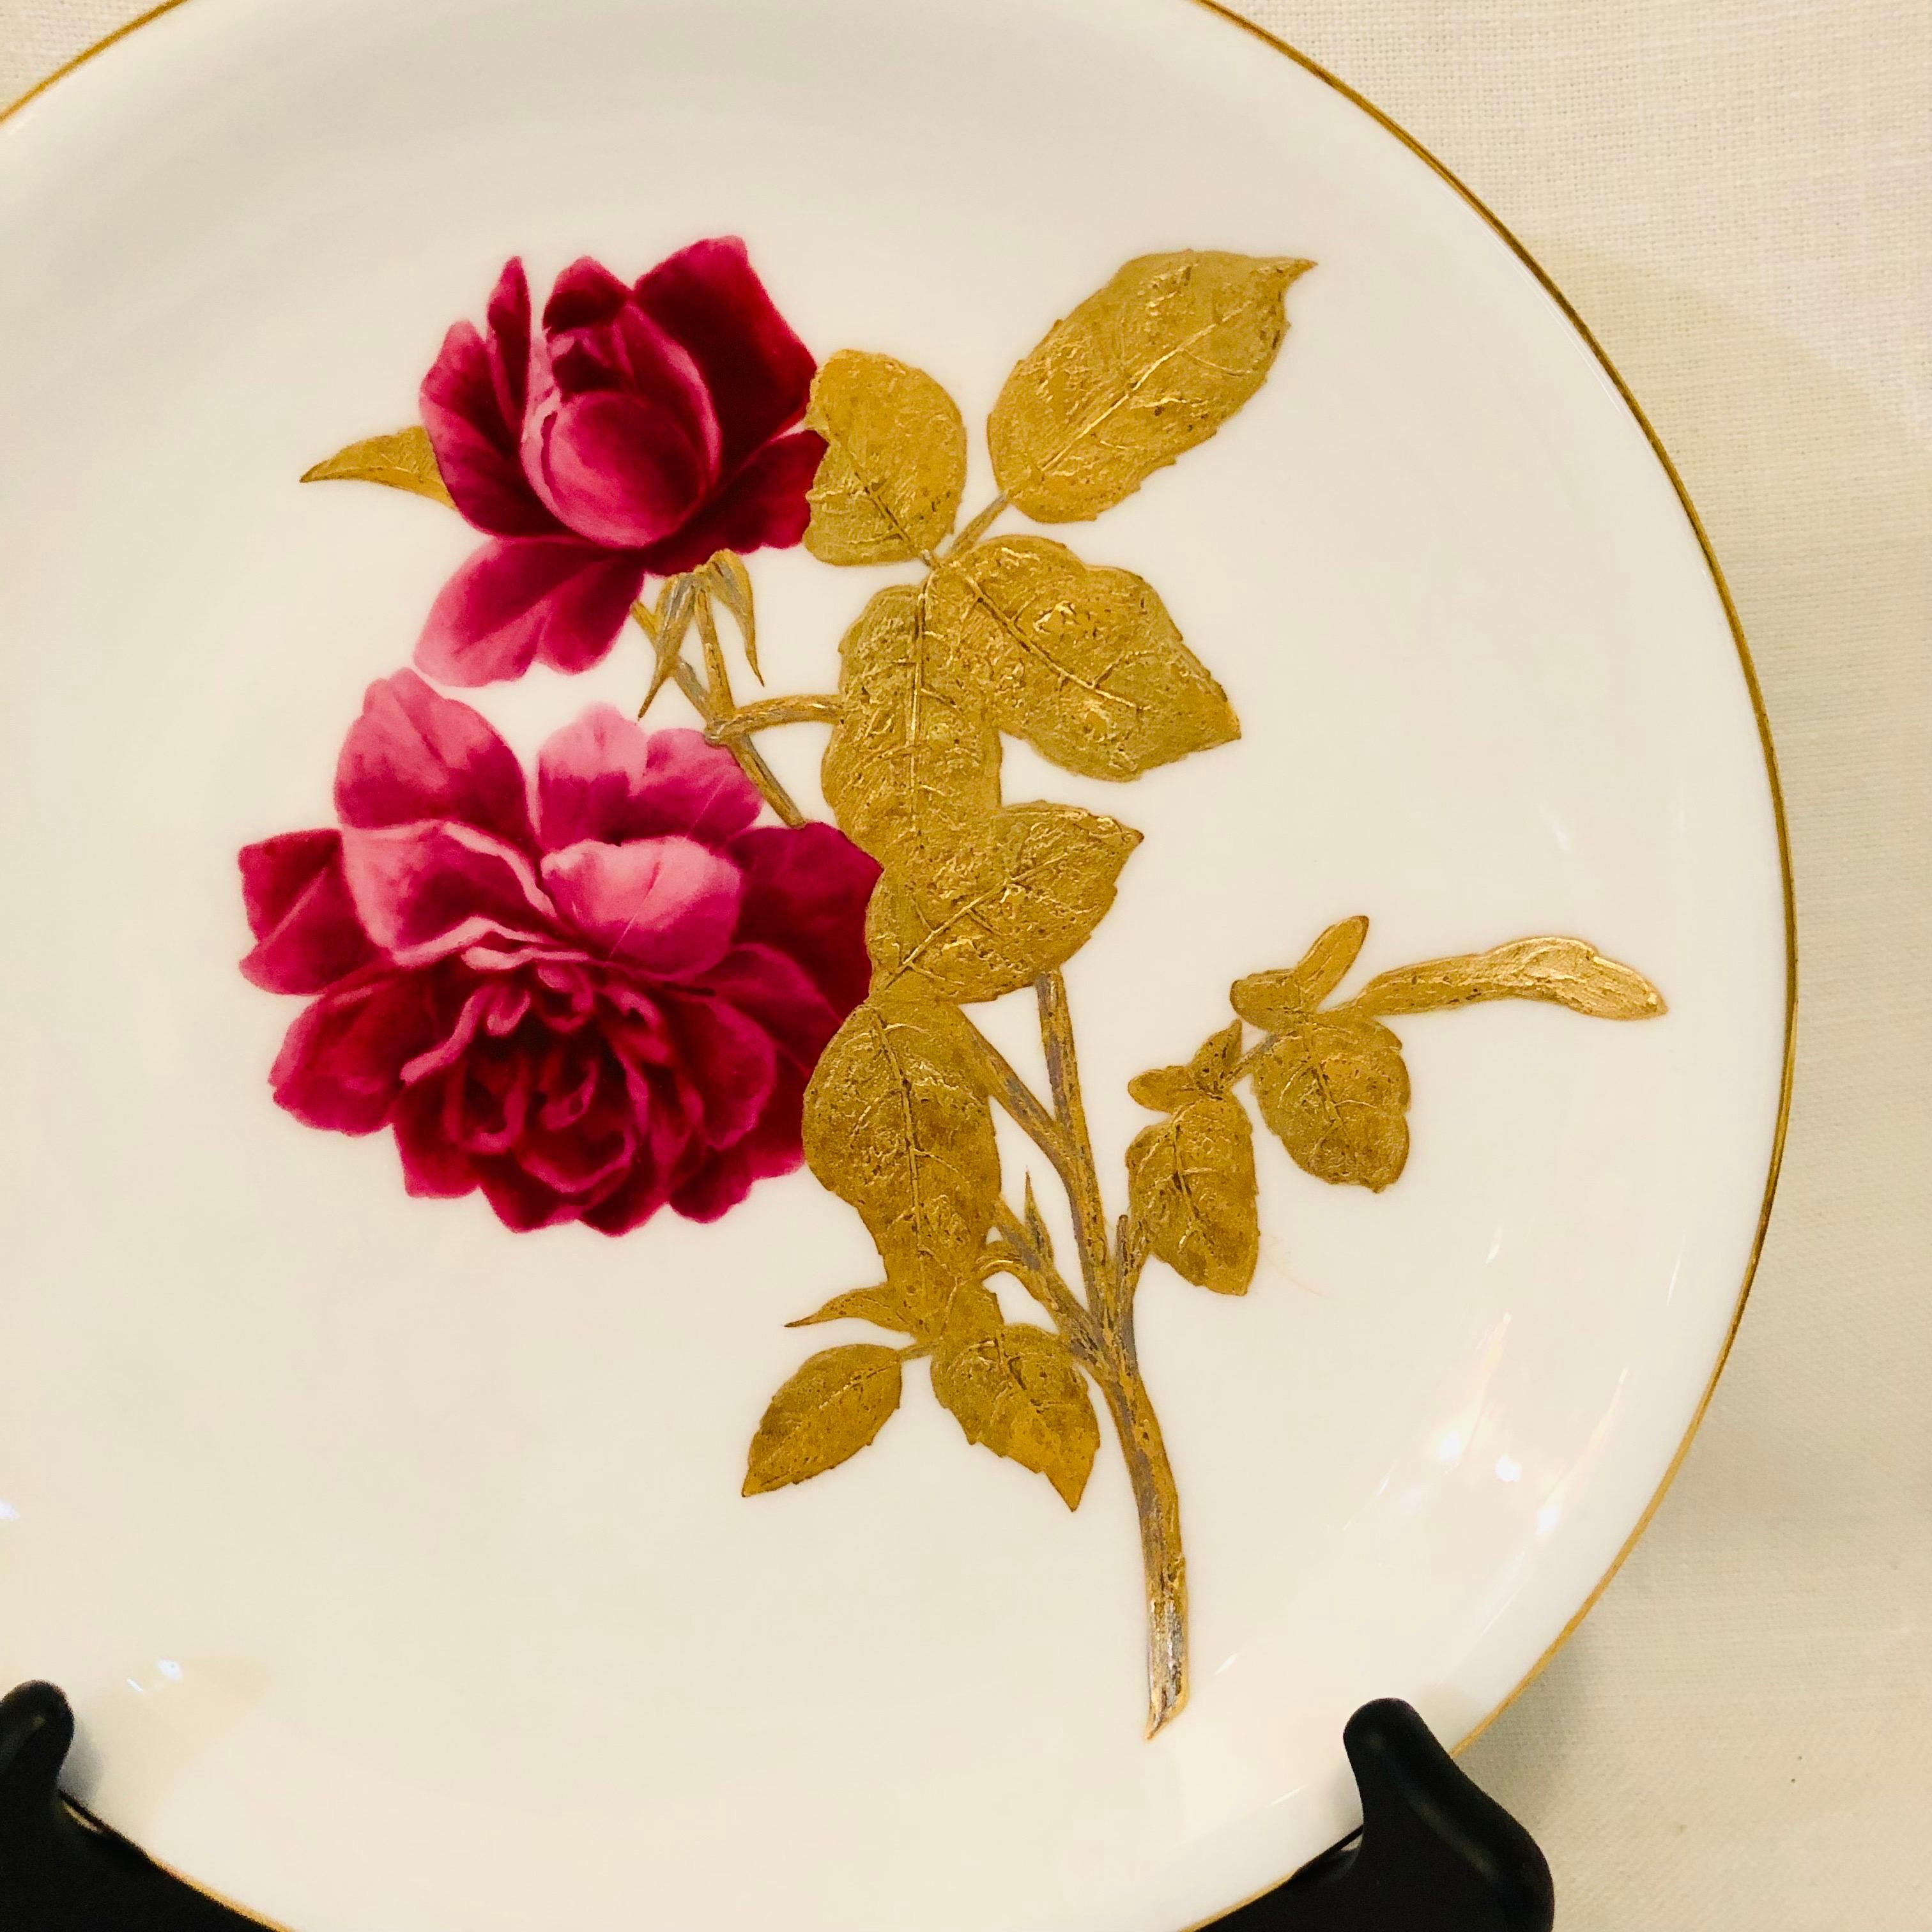 Minton Plates Each Painted With a Different Rose With Gold and Platinum Accents 1